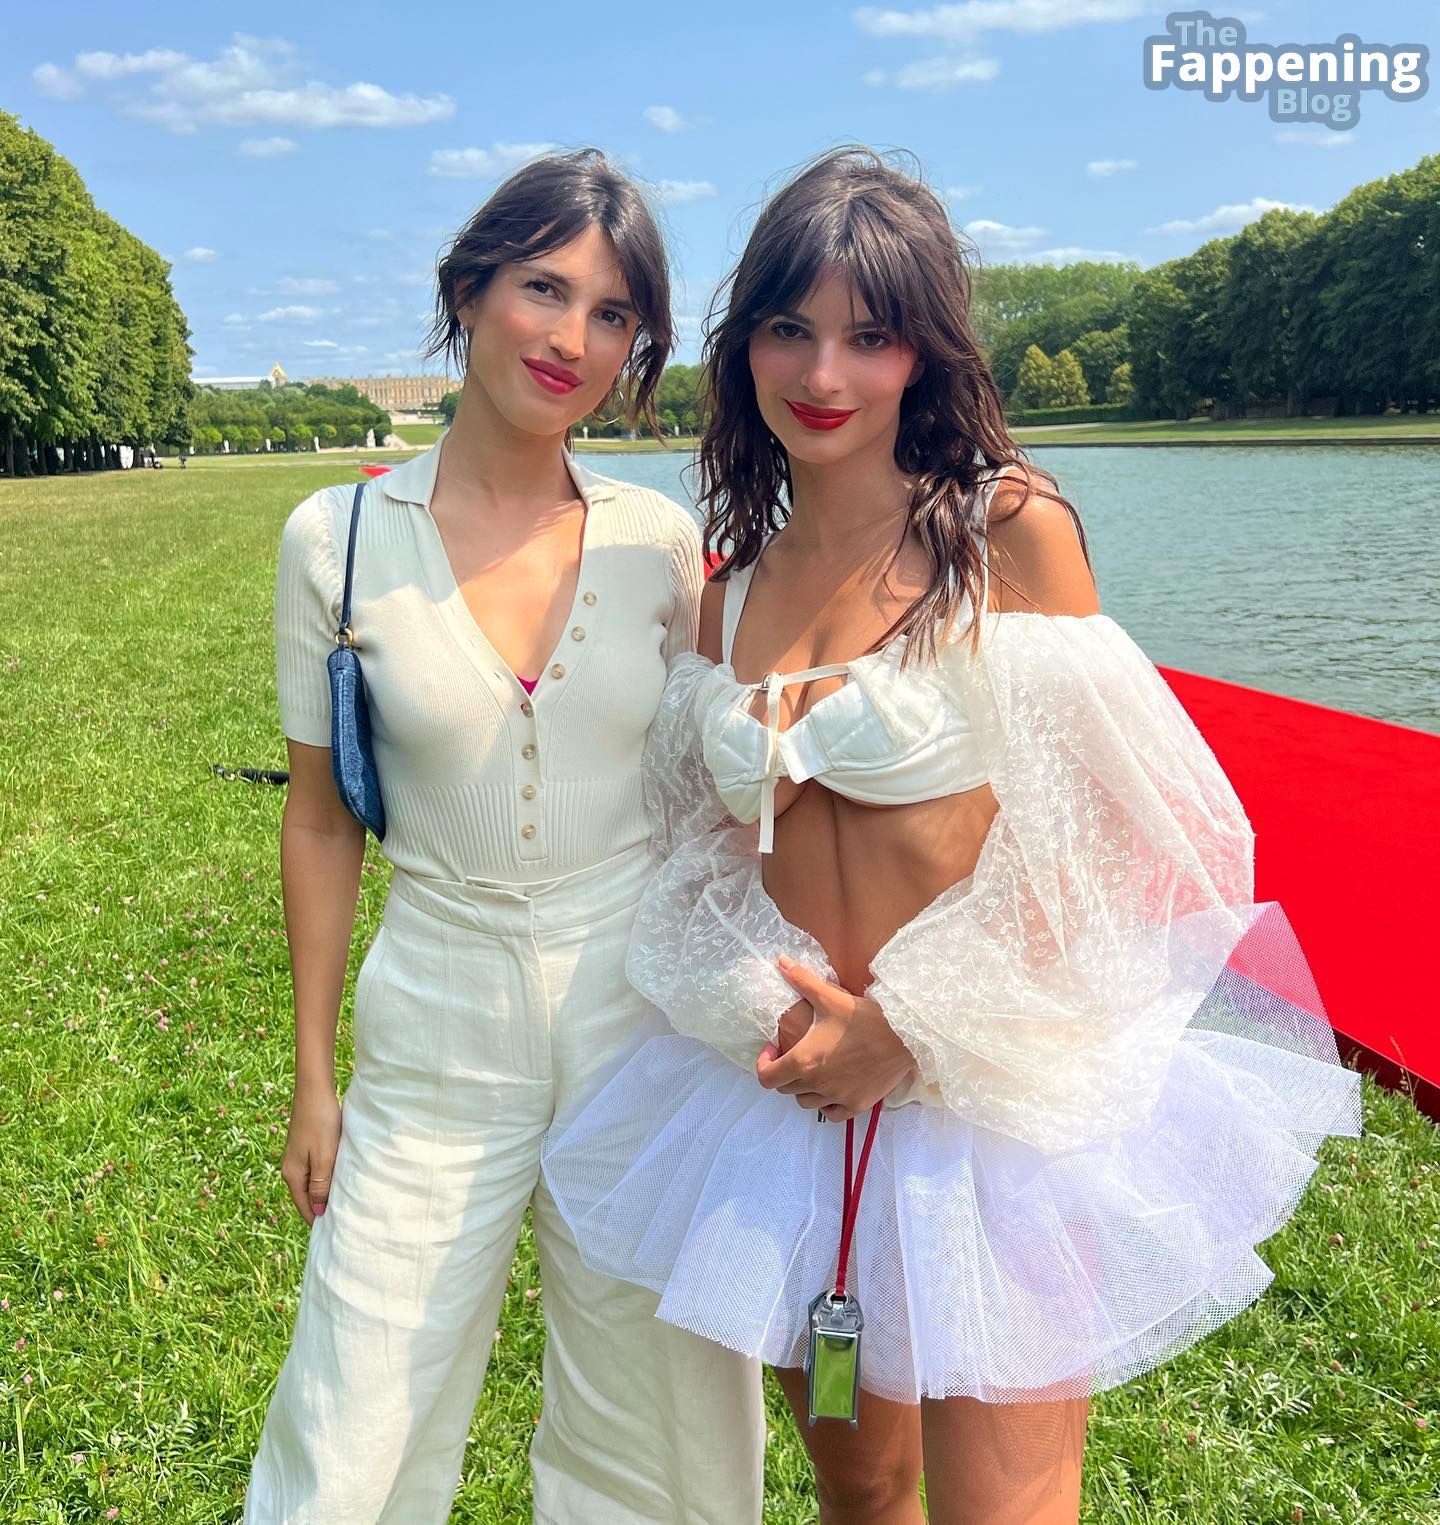 Emily Ratajkowski Shows Off Her Flawless Figure in a White Dress (75 New Photos + Video)